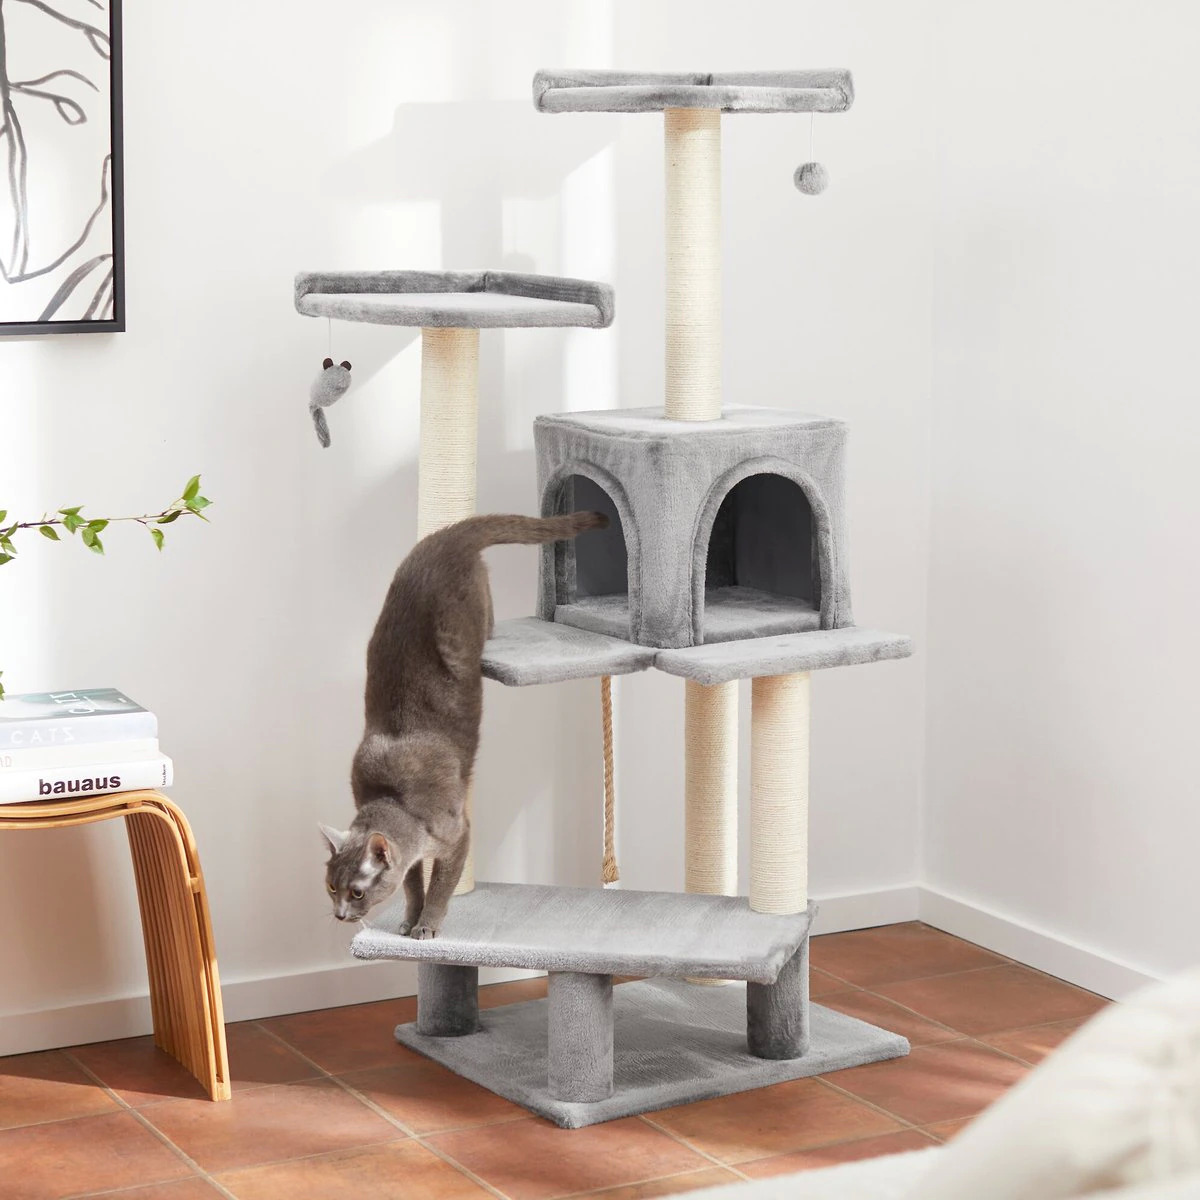 Chewy: Frisco 57-in Faux Fur Cat Tree & Condo, Gray $56.92 + Free Shipping